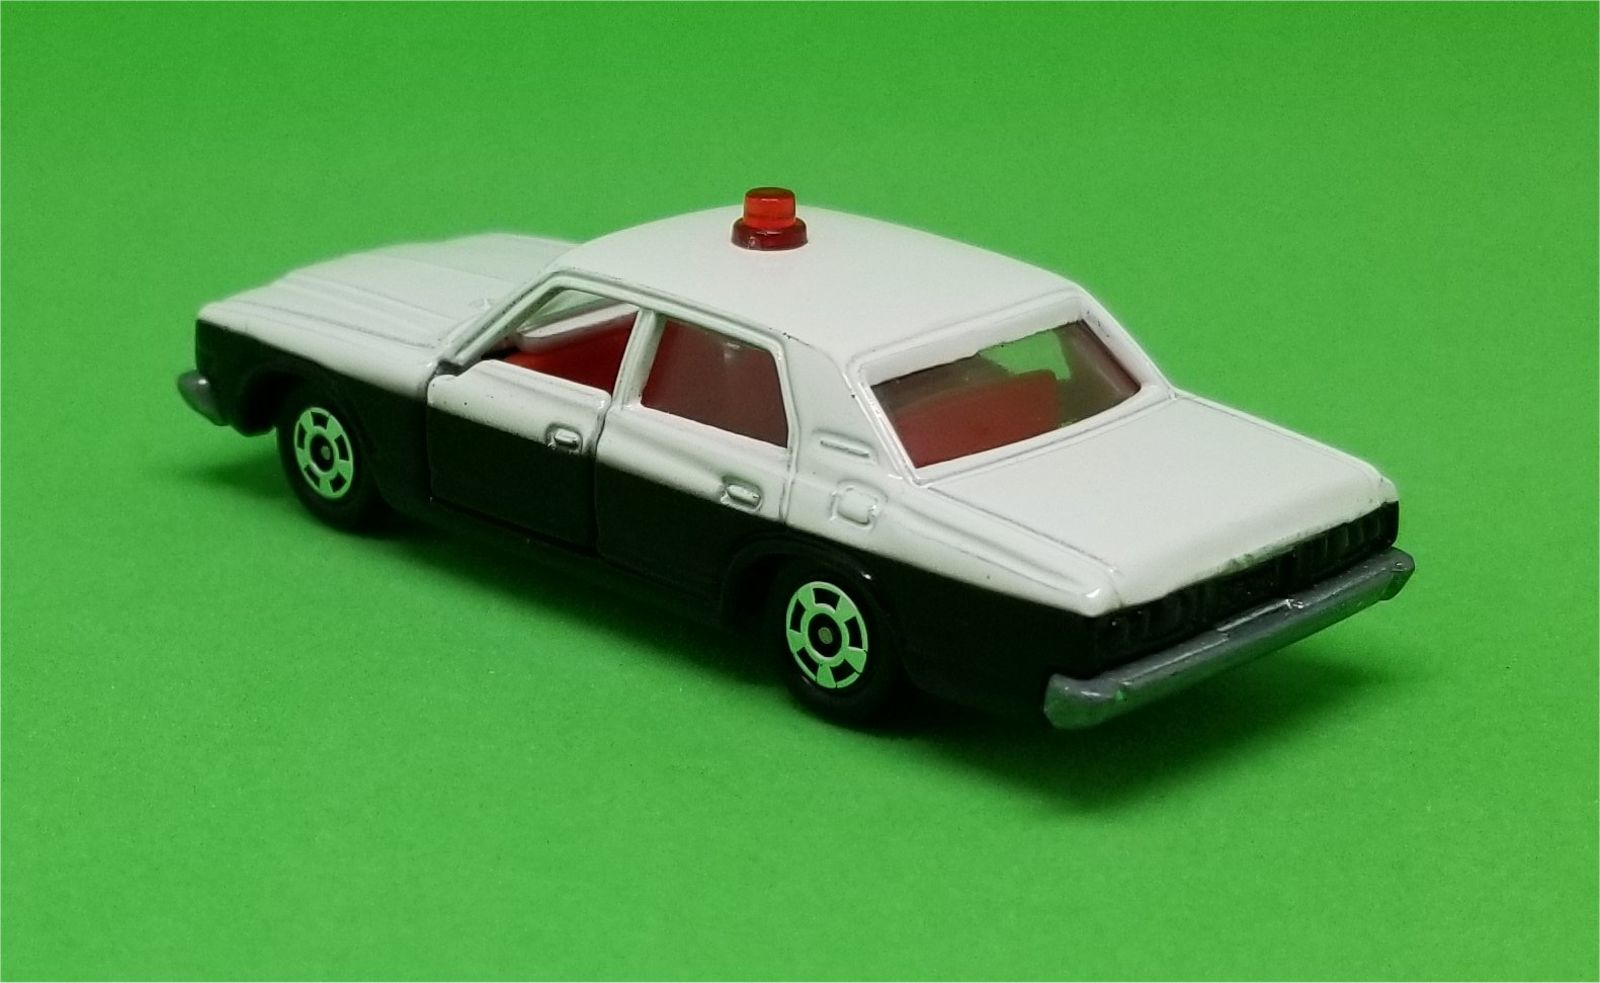 Illustration for article titled [REVIEW] Tomica Toyota Crown Police Car